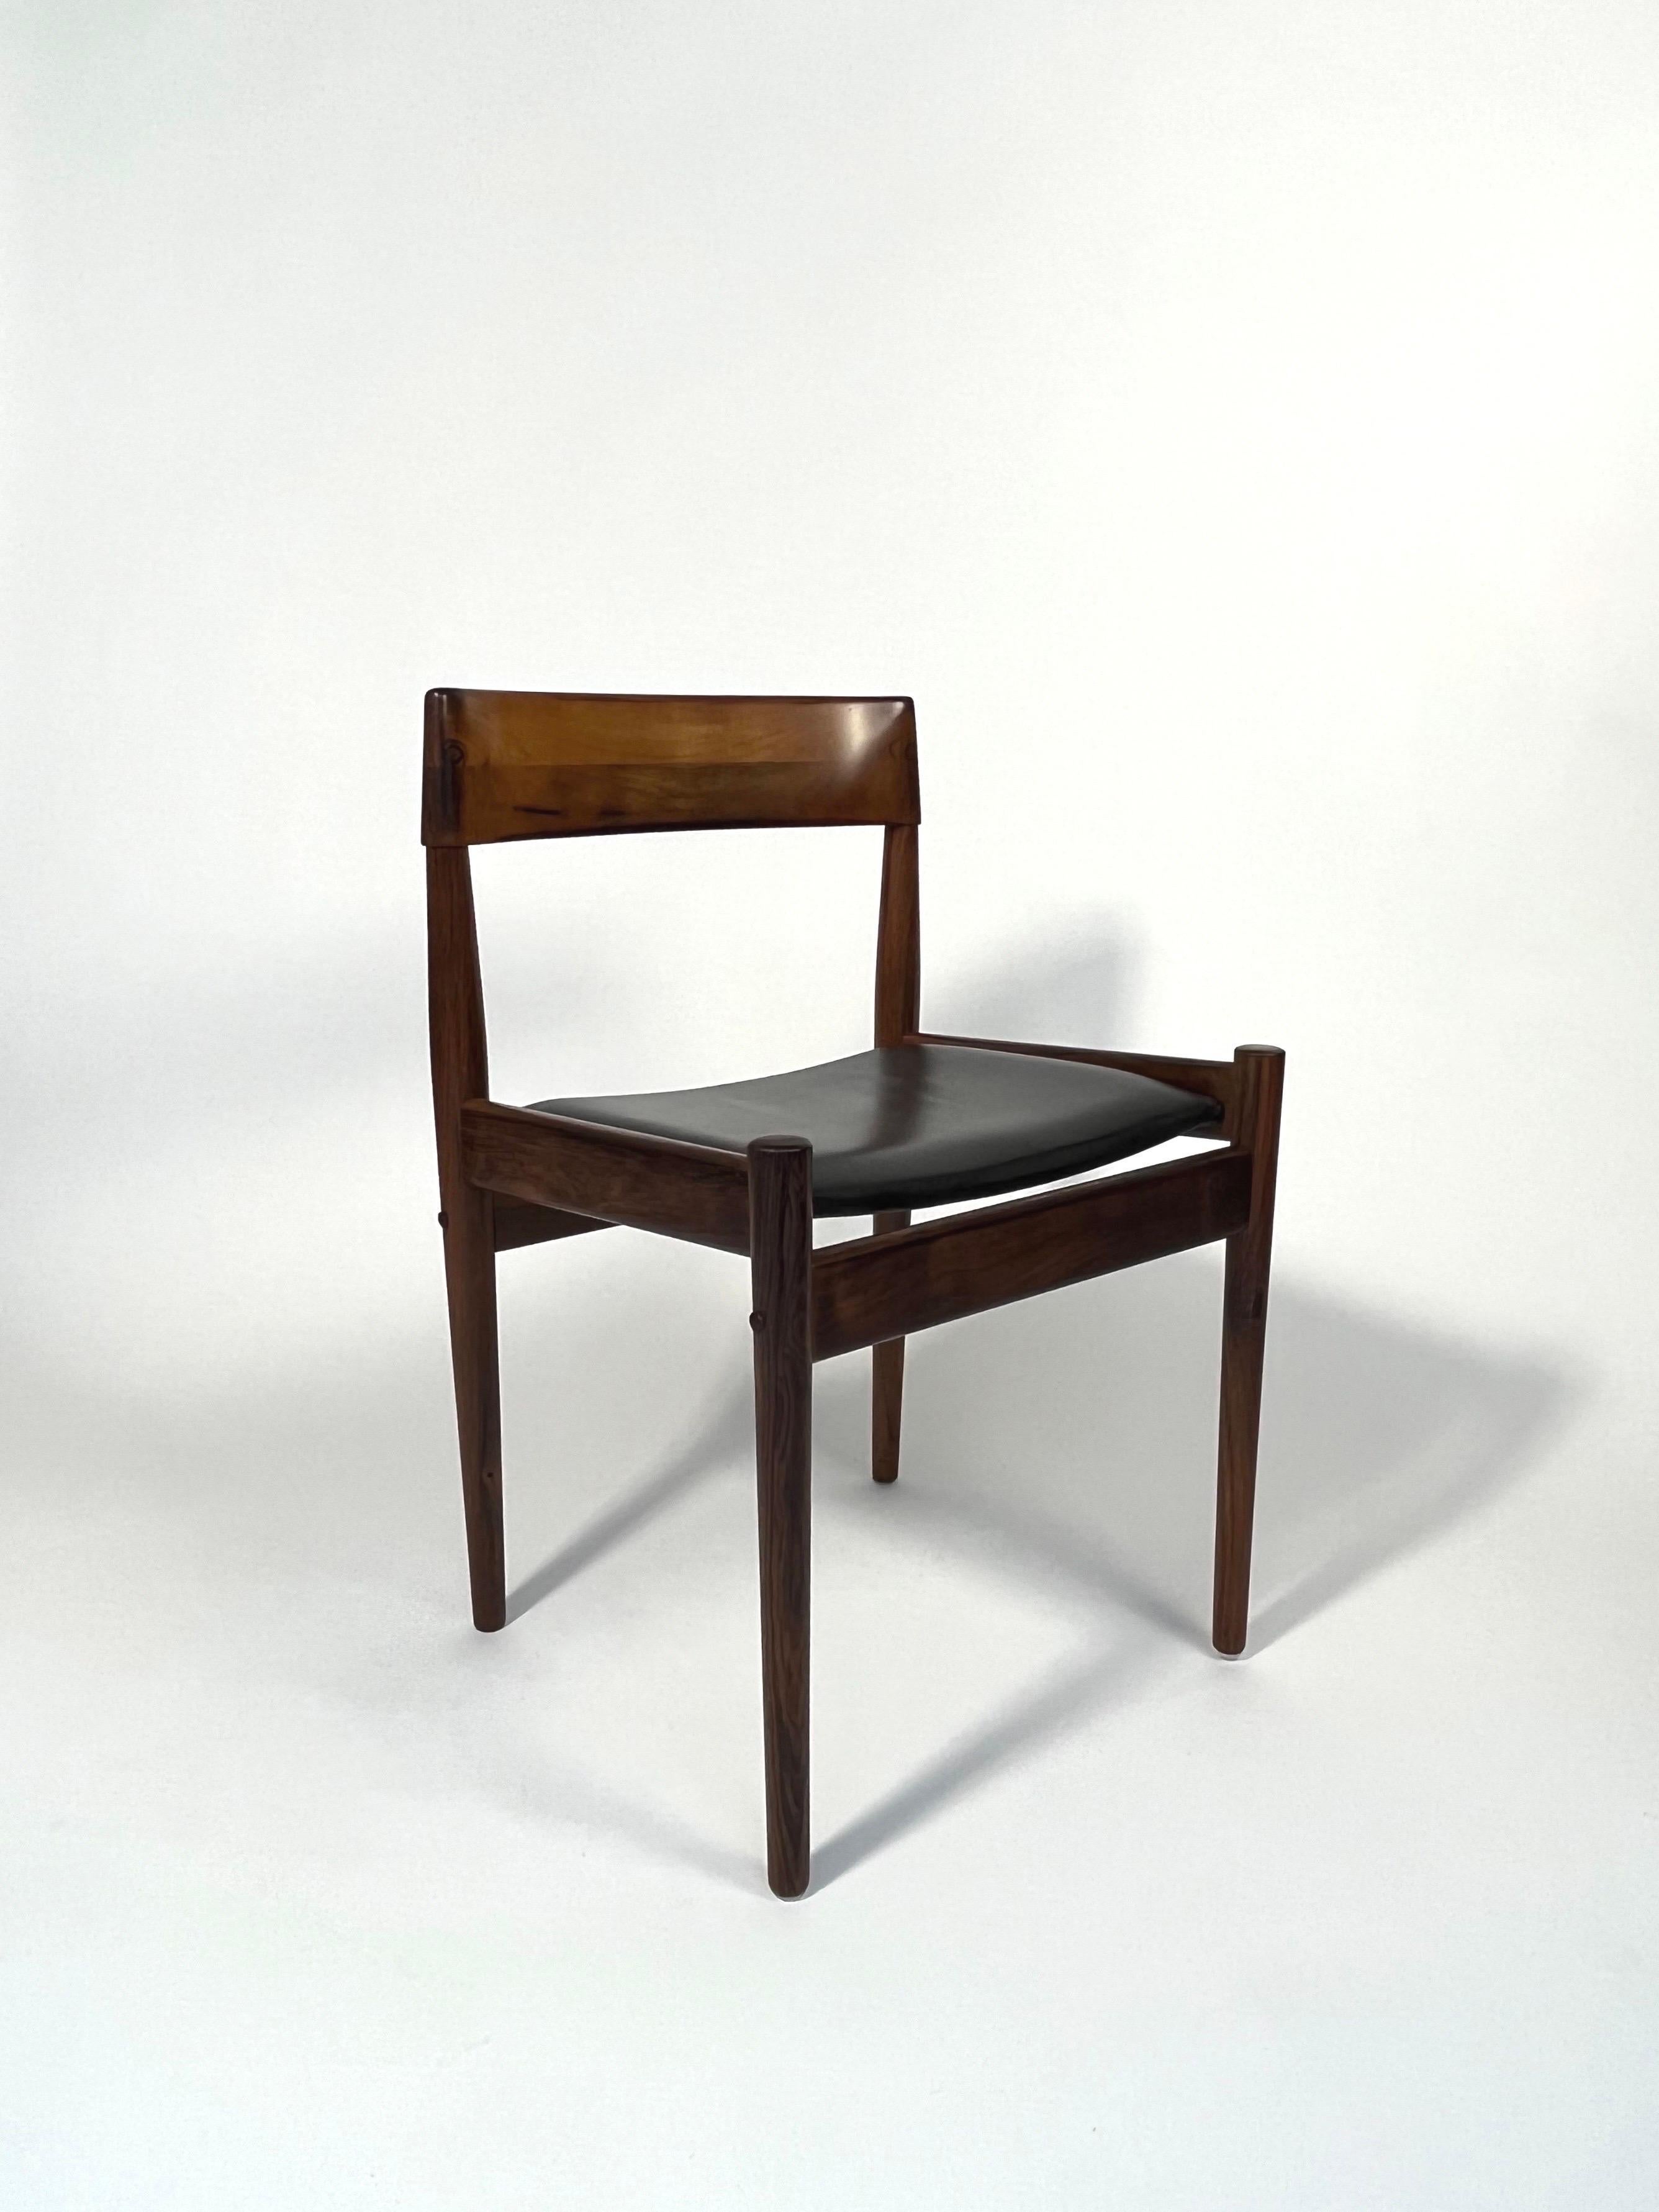 Hand-Crafted Pair of Grete Jalk Dining Chairs Rosewood P Jeppesen Denmark 1960s For Sale